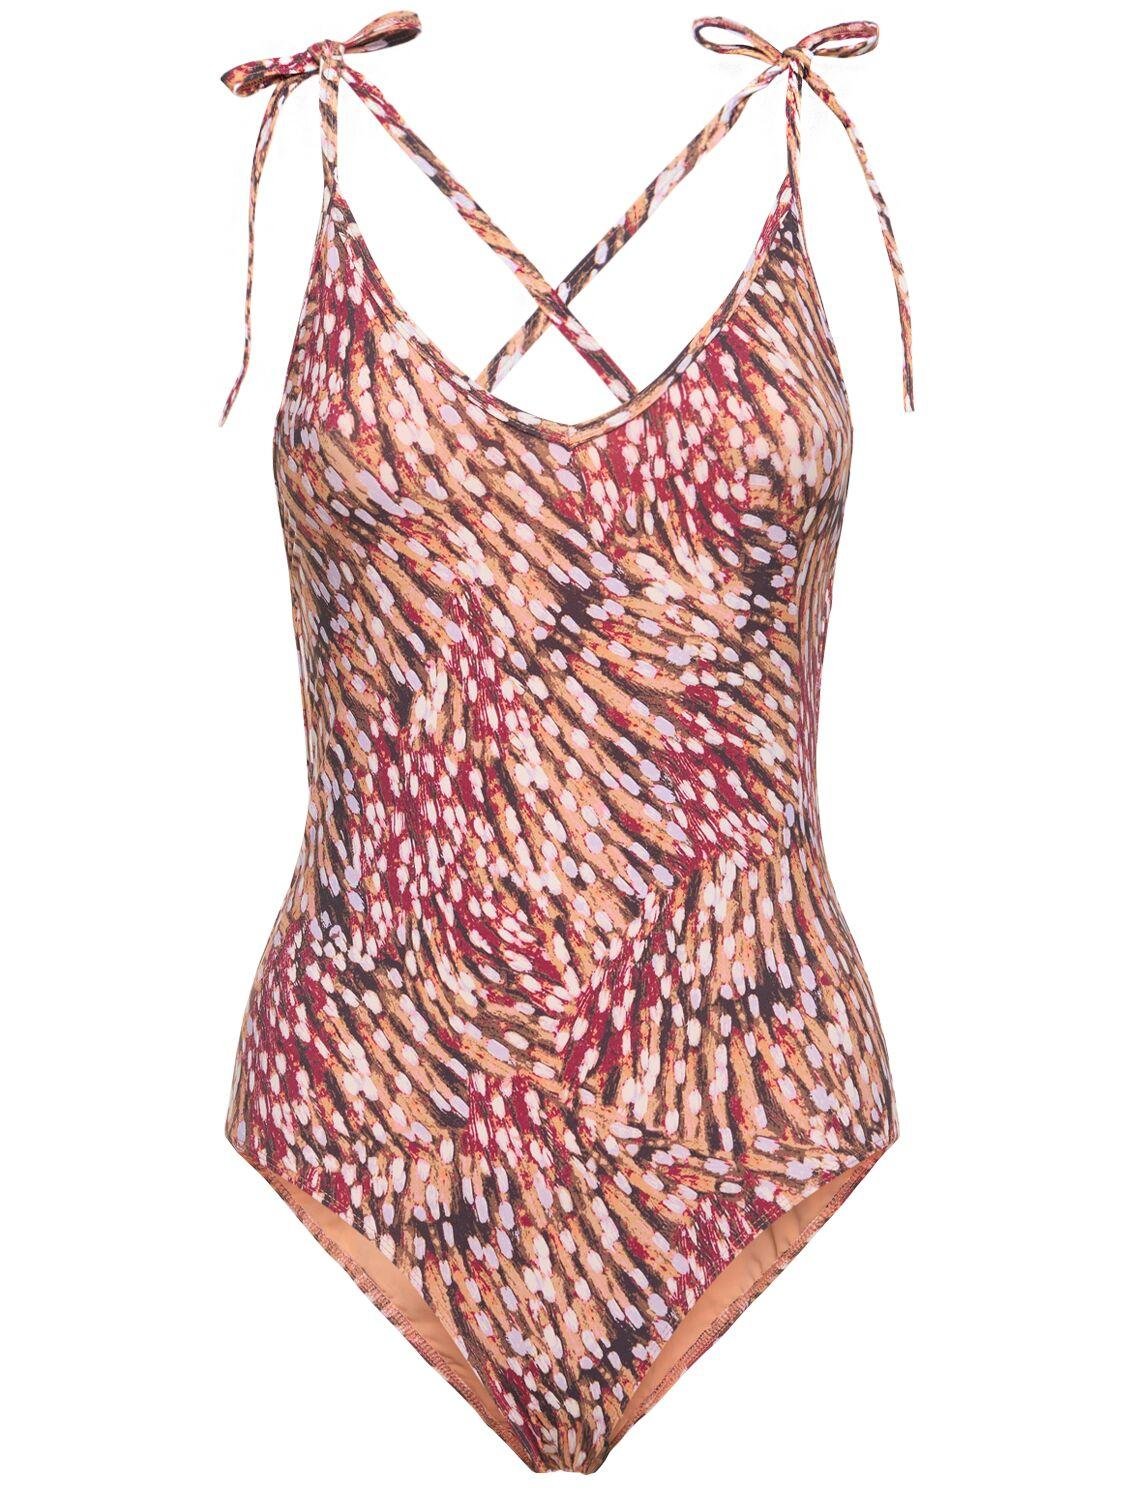 Swan Printed One Piece Swimsuit by ISABEL MARANT